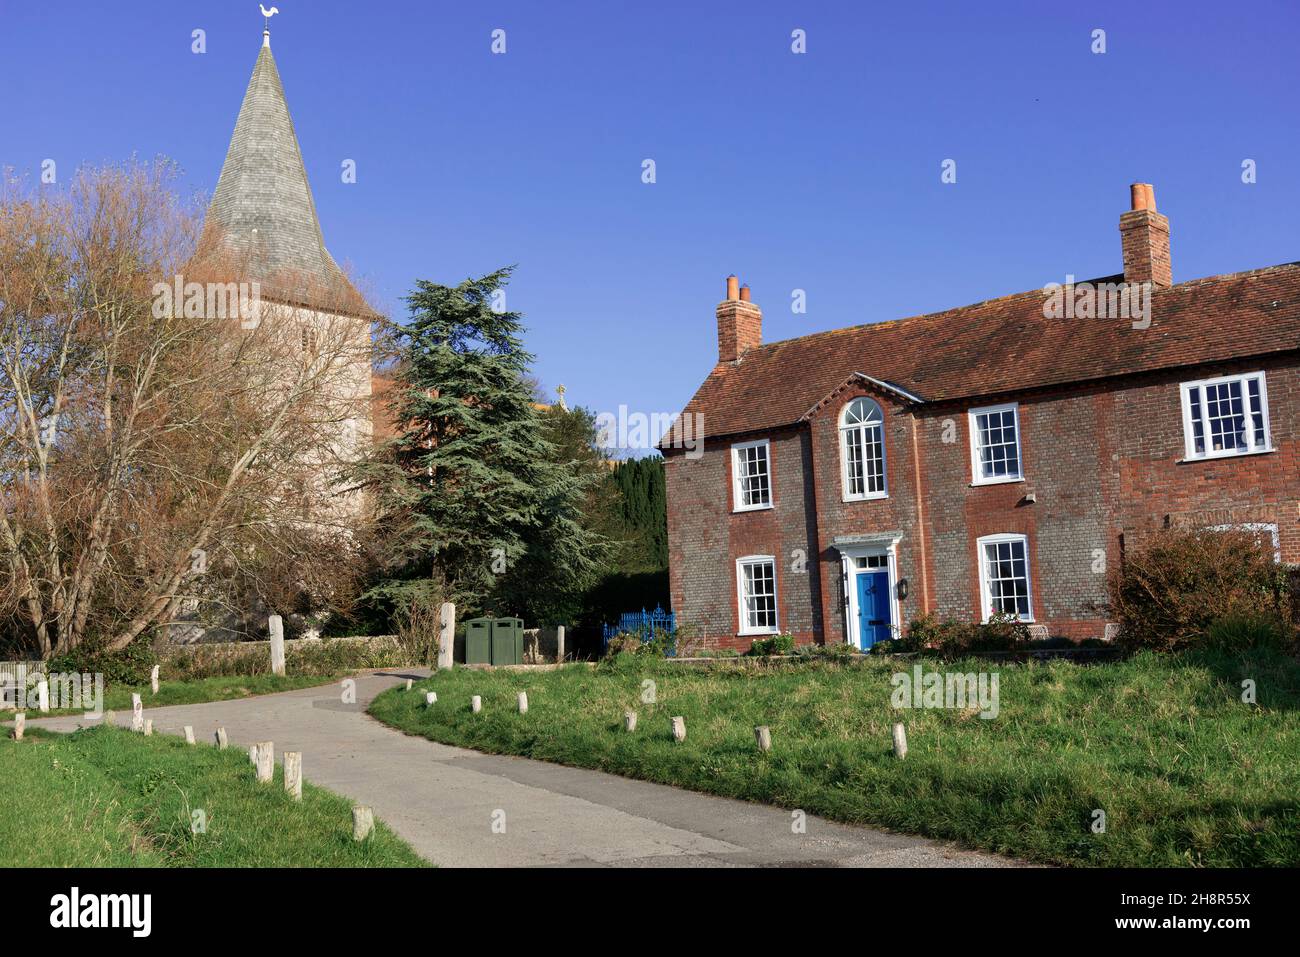 The village green at Bosham,which overlooks the sea,showing grade II listed Brook House built in 1743 and the Holy Trinity Church,Brook Lane,Bosham,UK Stock Photo